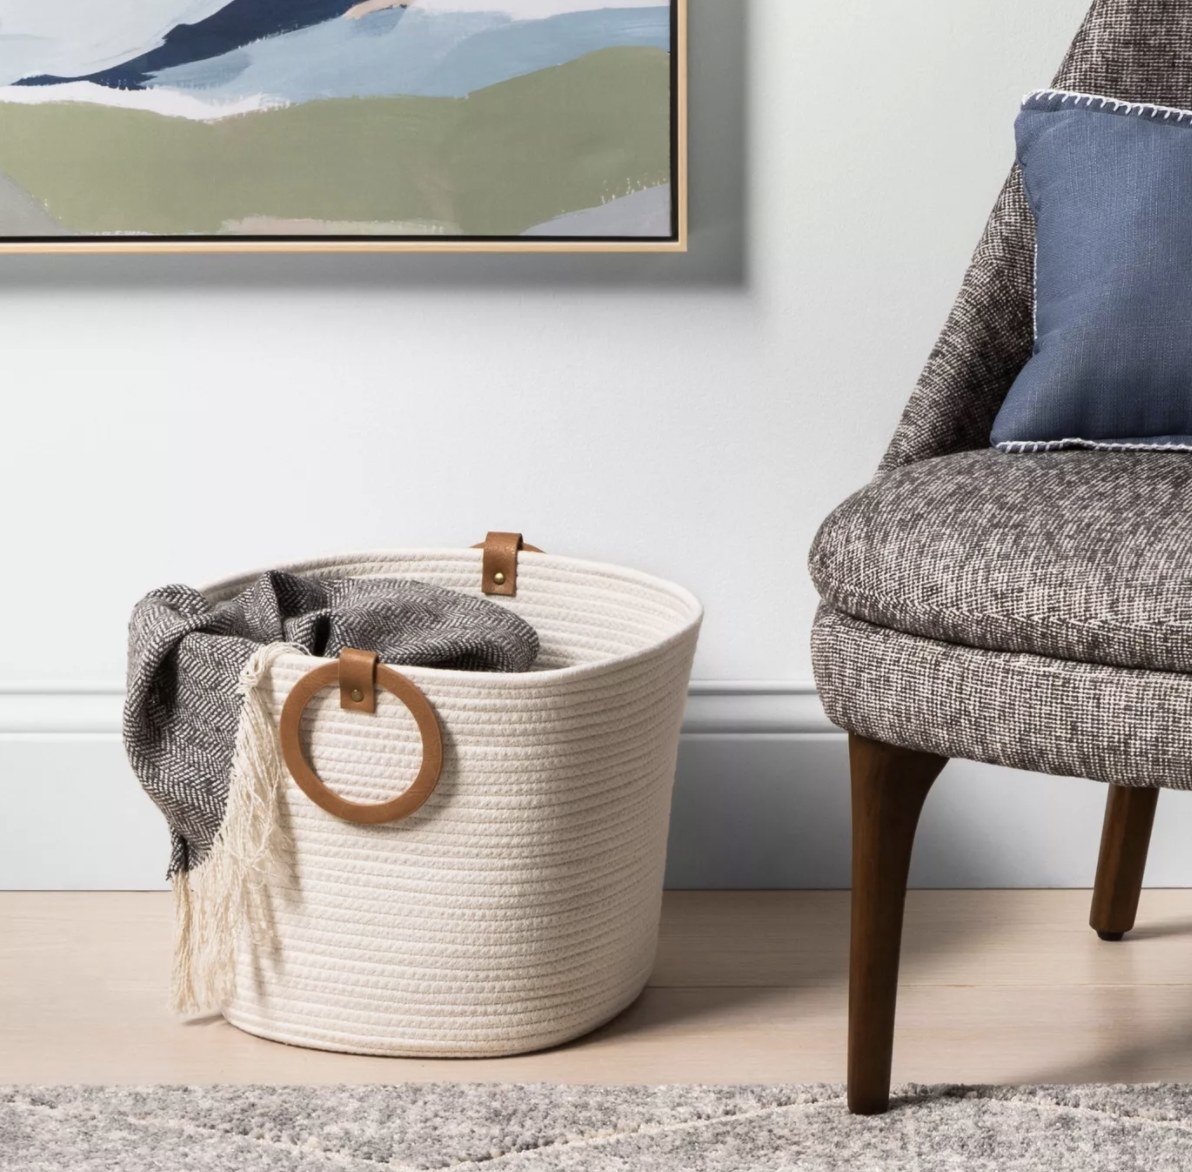 The white coiled basket with brown rounded leather straps is set up in a neutral room